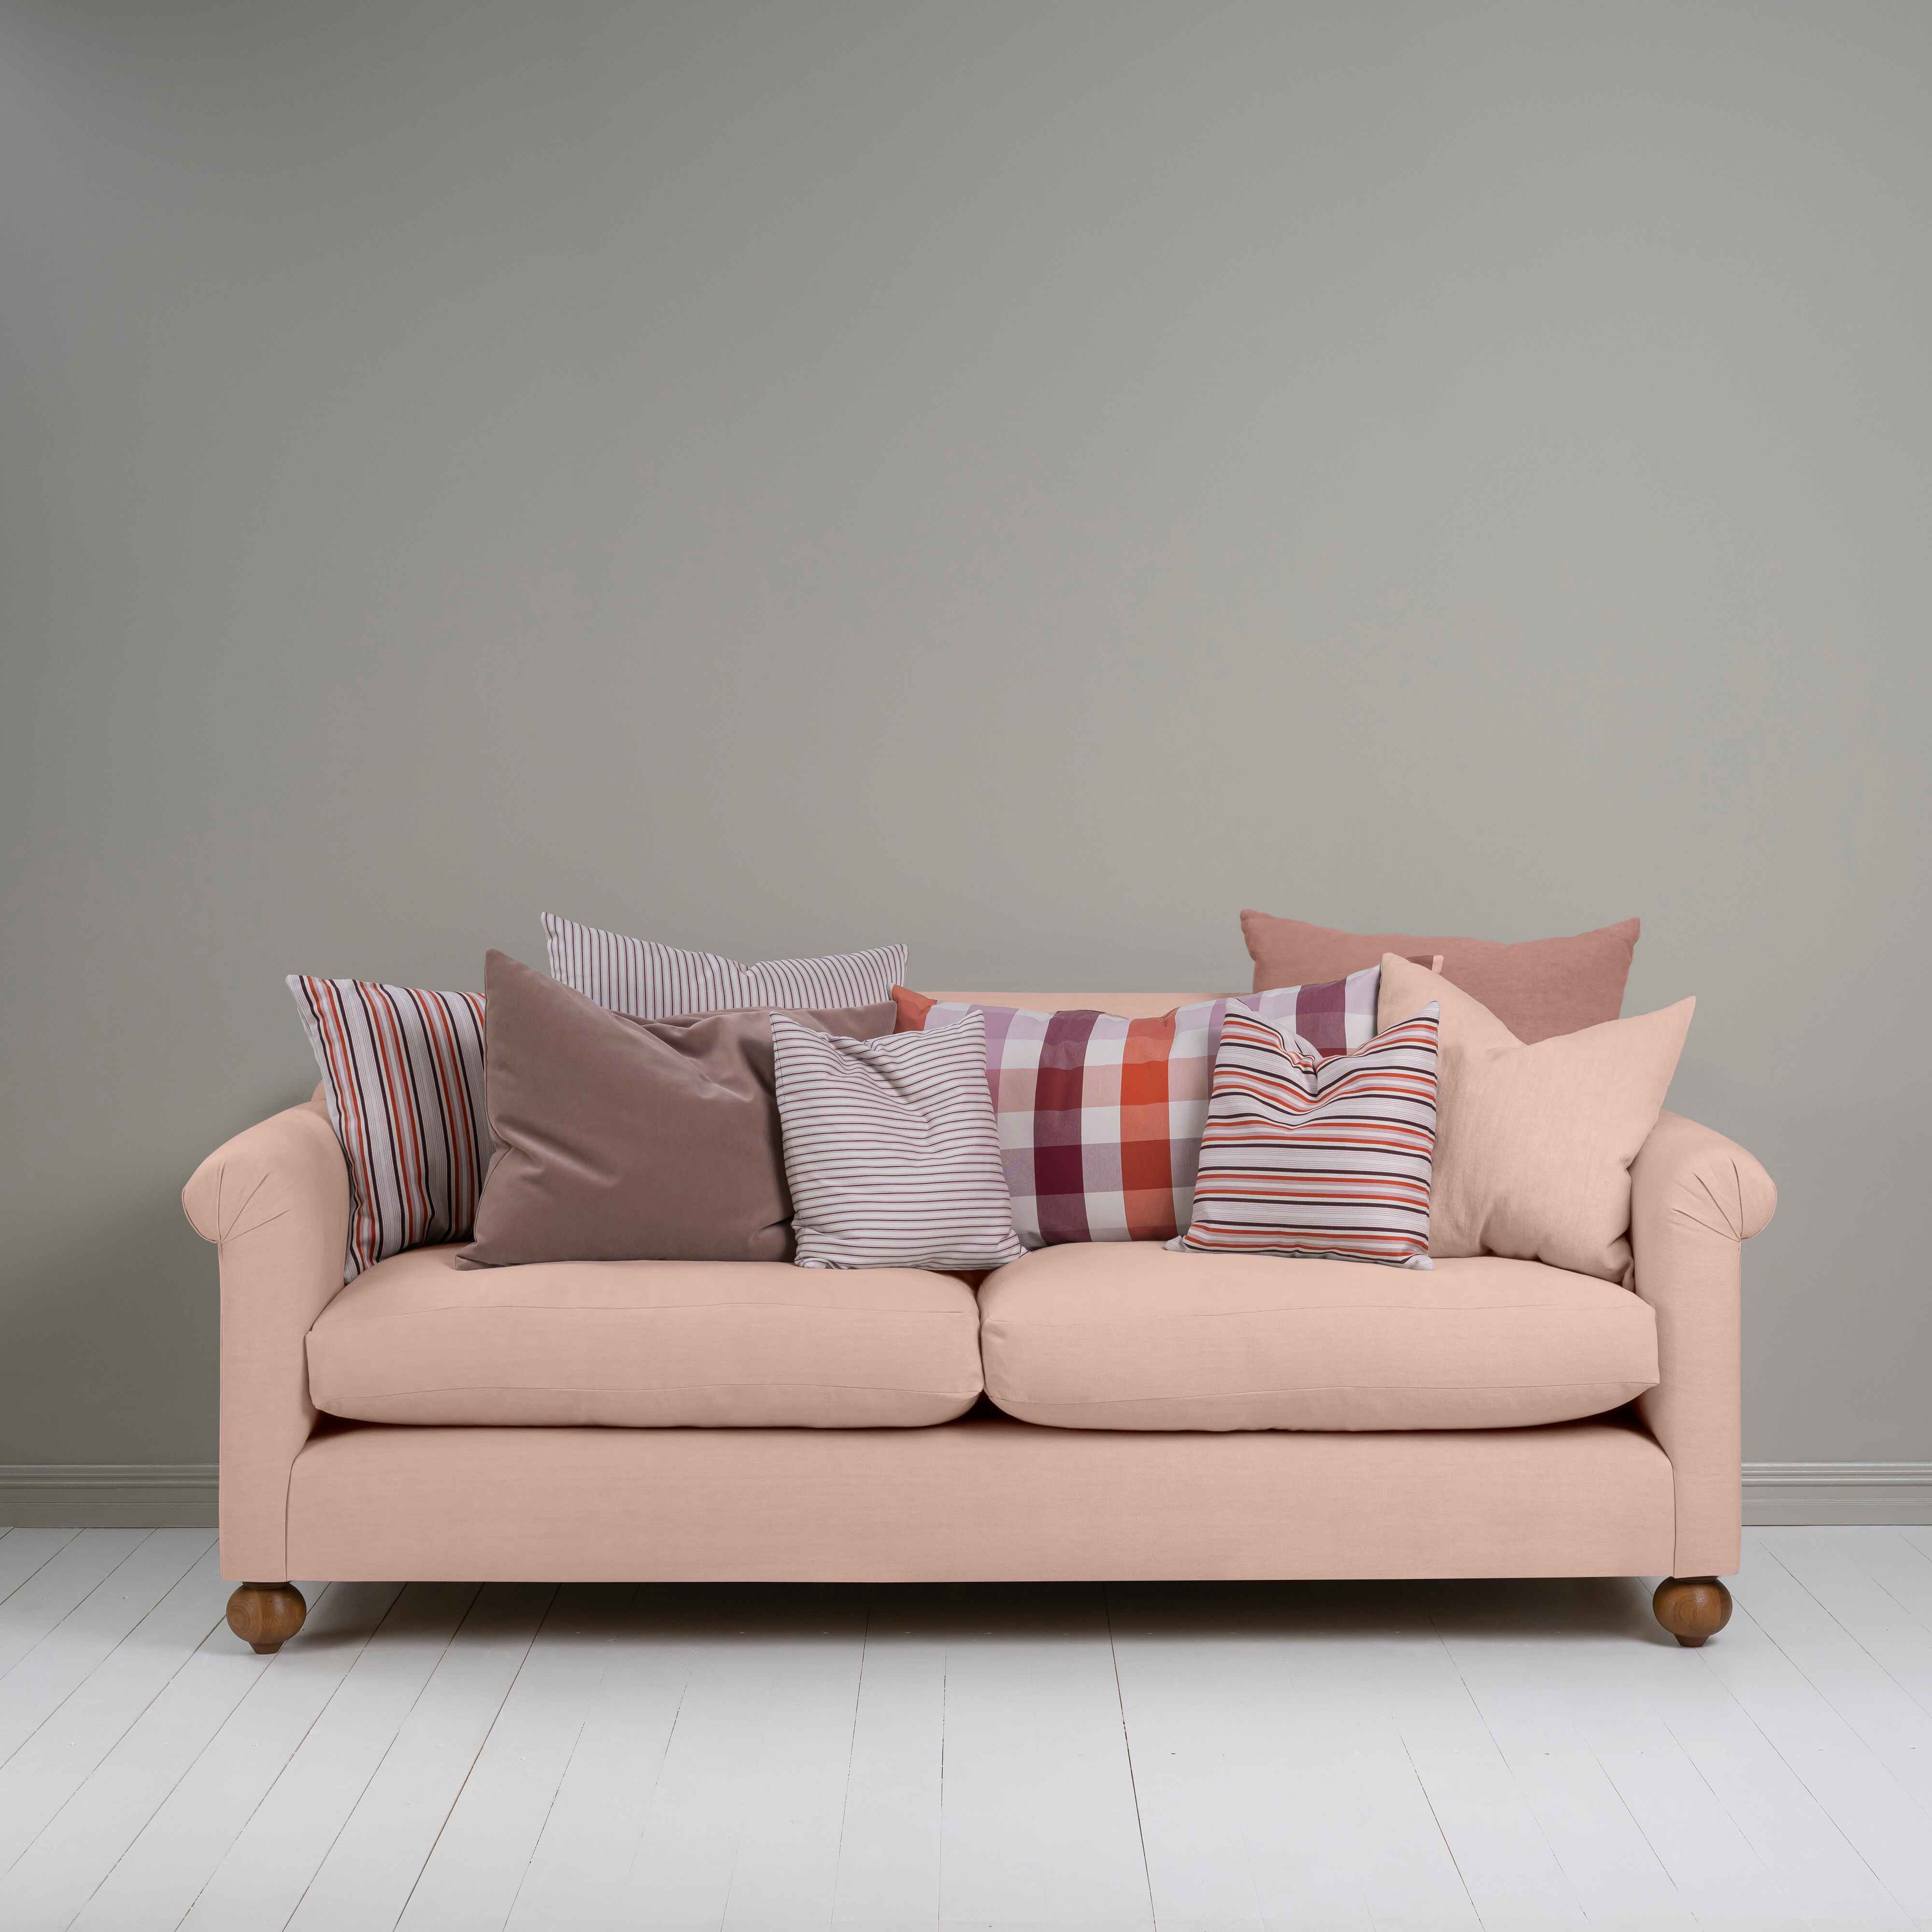  Dolittle 4 seater Sofa in Laidback Linen Dusky Pink 